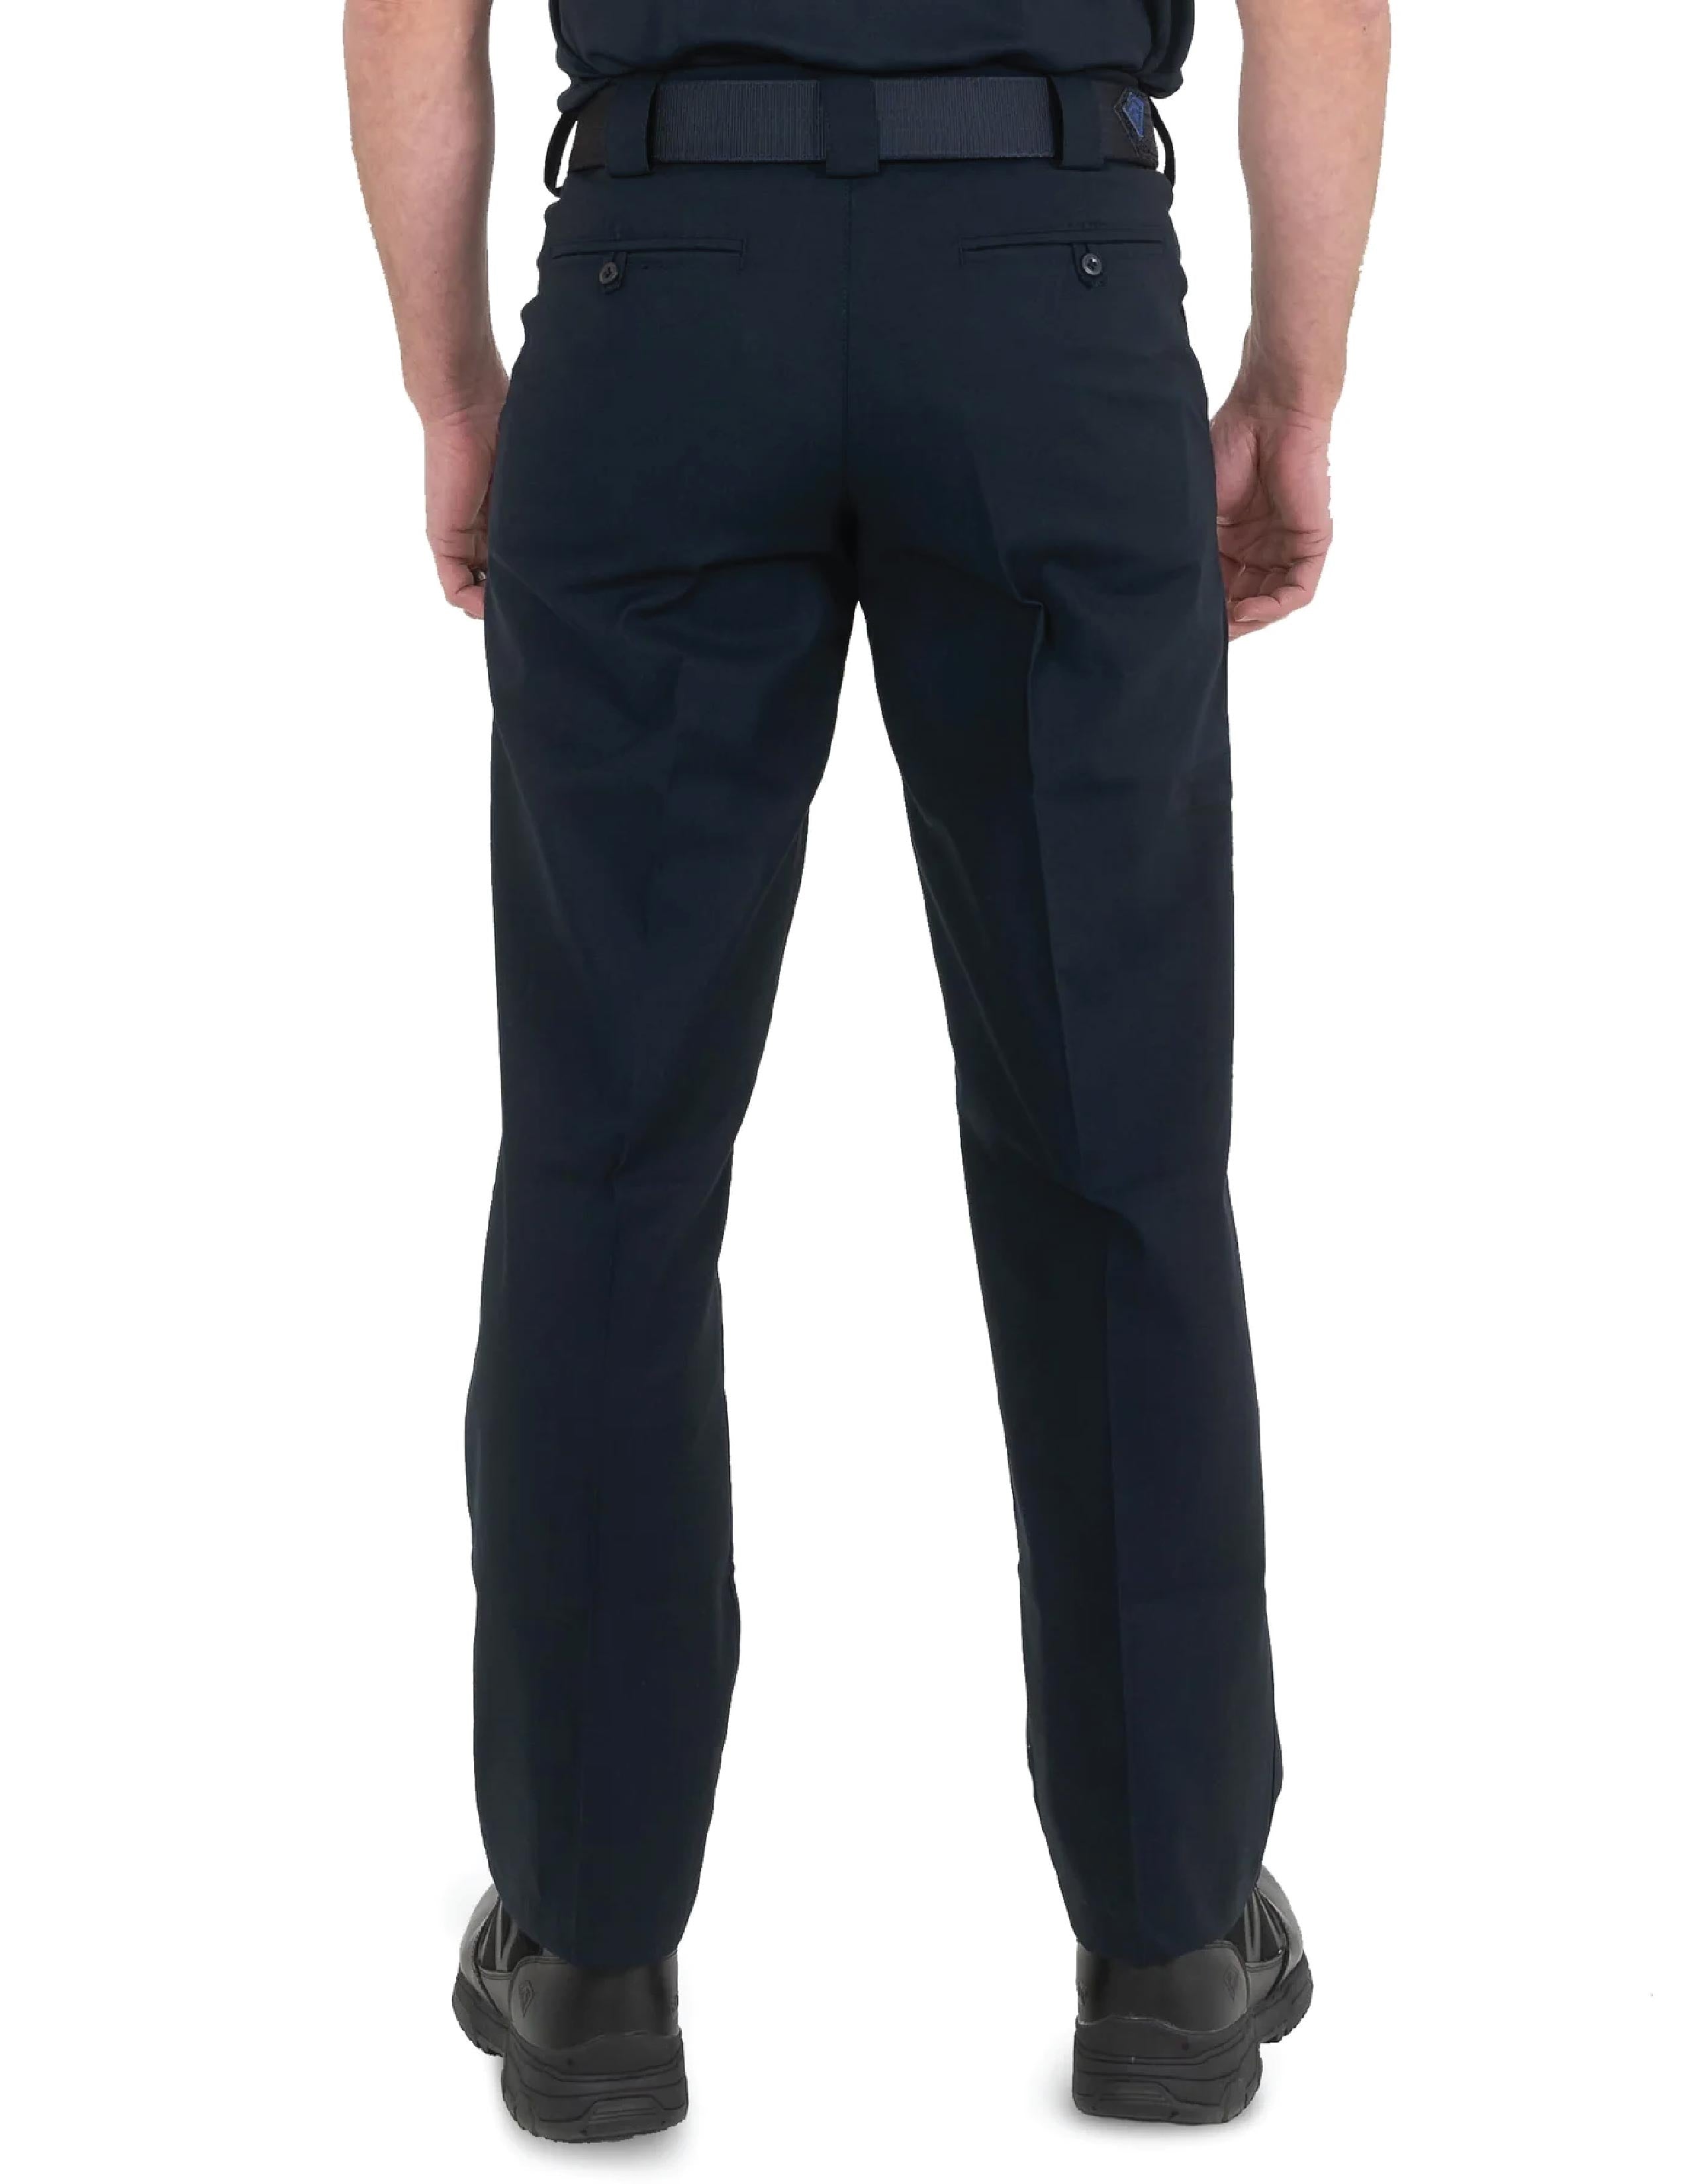 N) STYLE# 114018 MENS FIRST TACTICAL PRO DUTY UNIFORM PANT